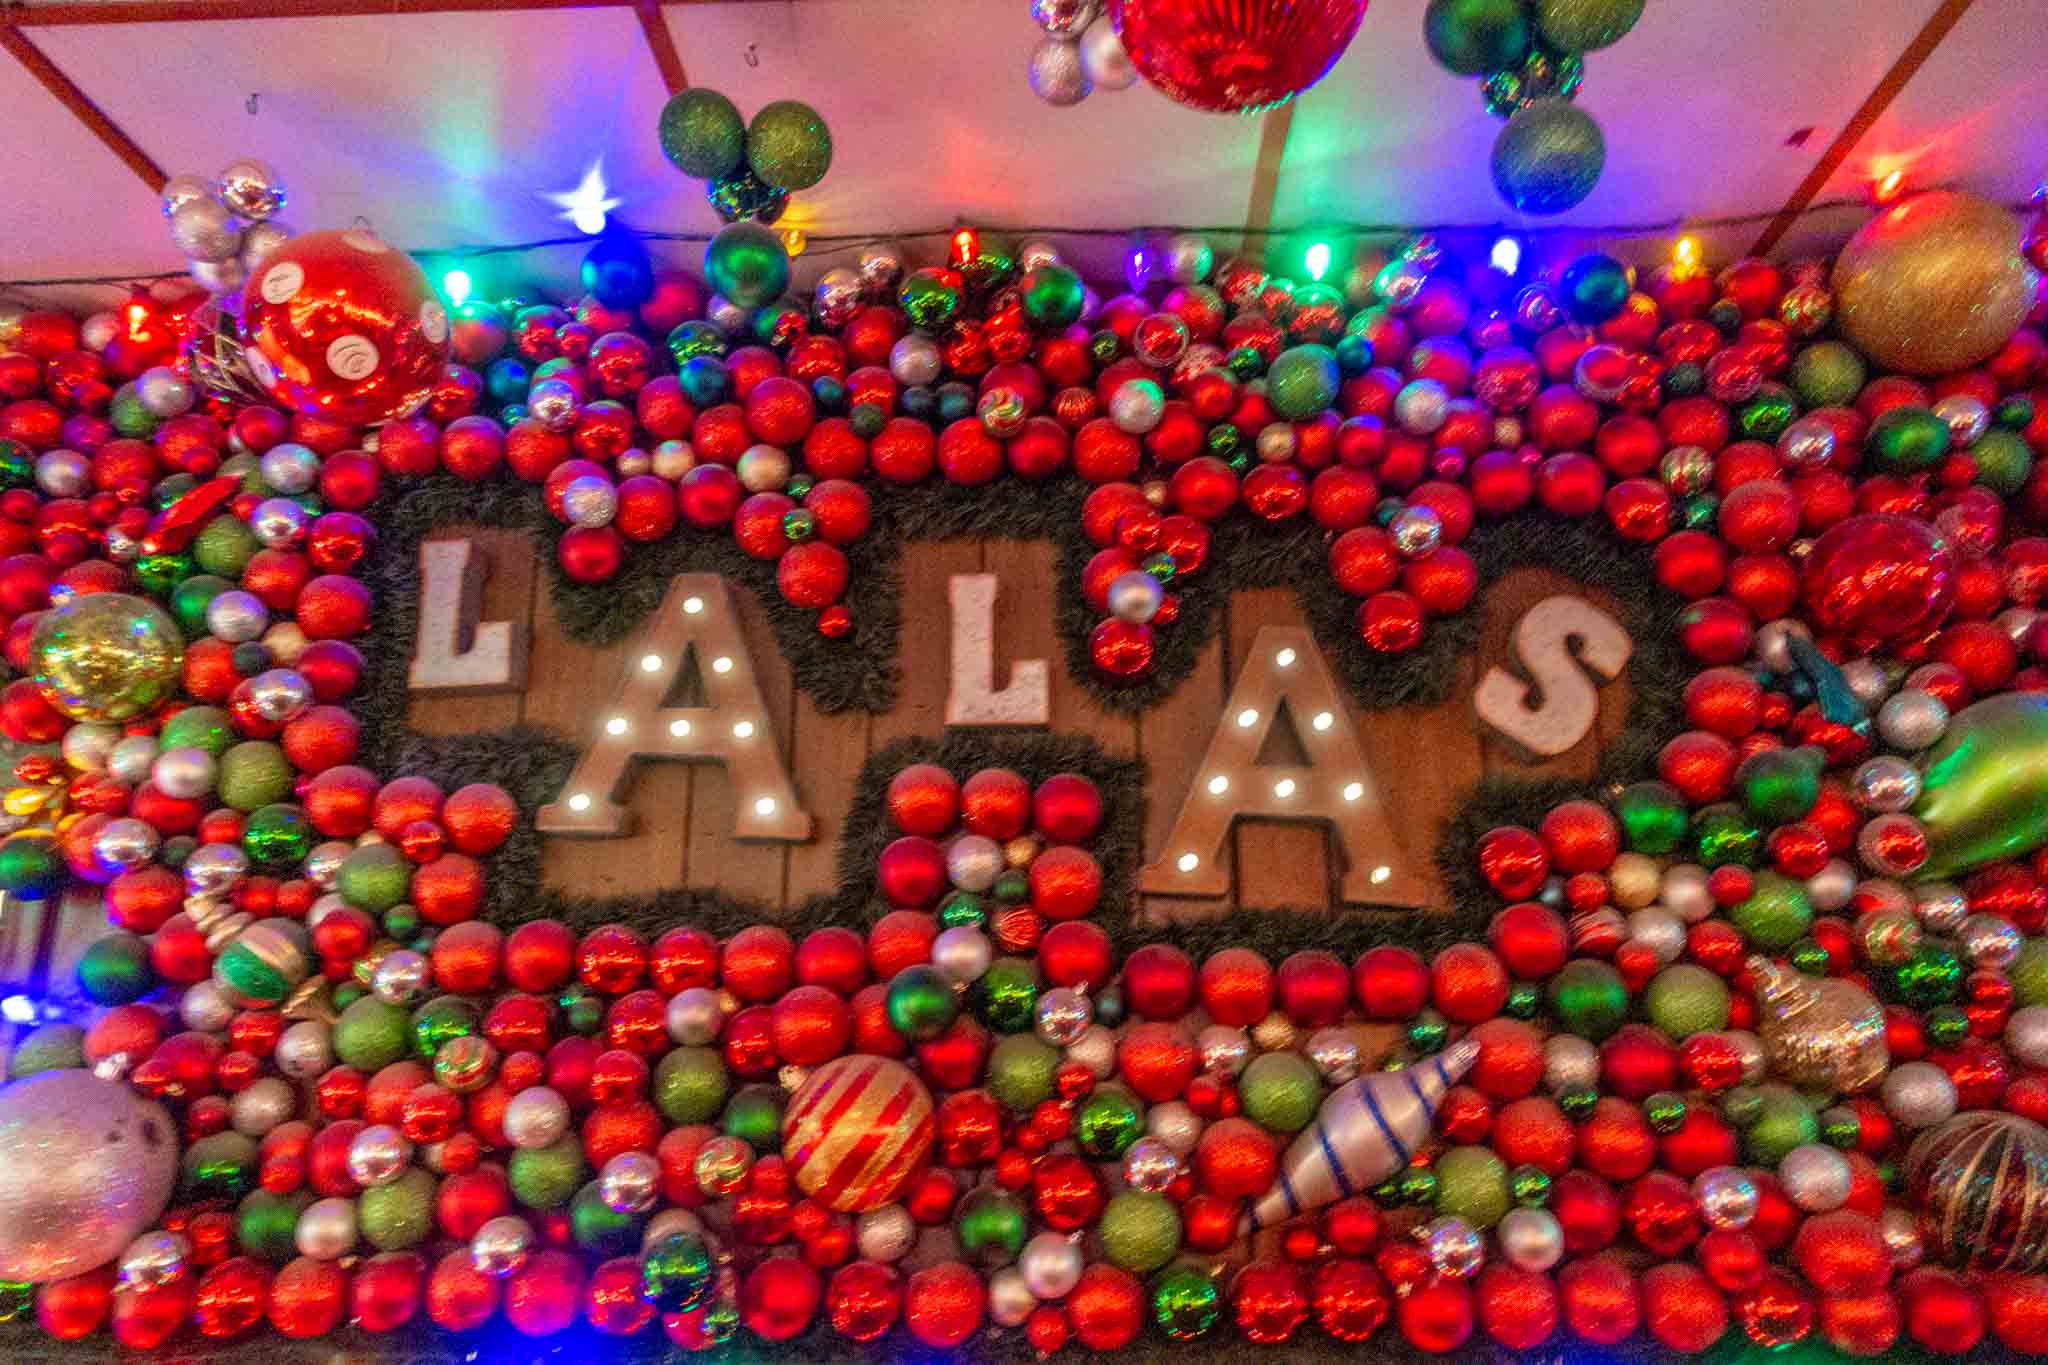 Lala's sign surrounded by Christmas ornaments